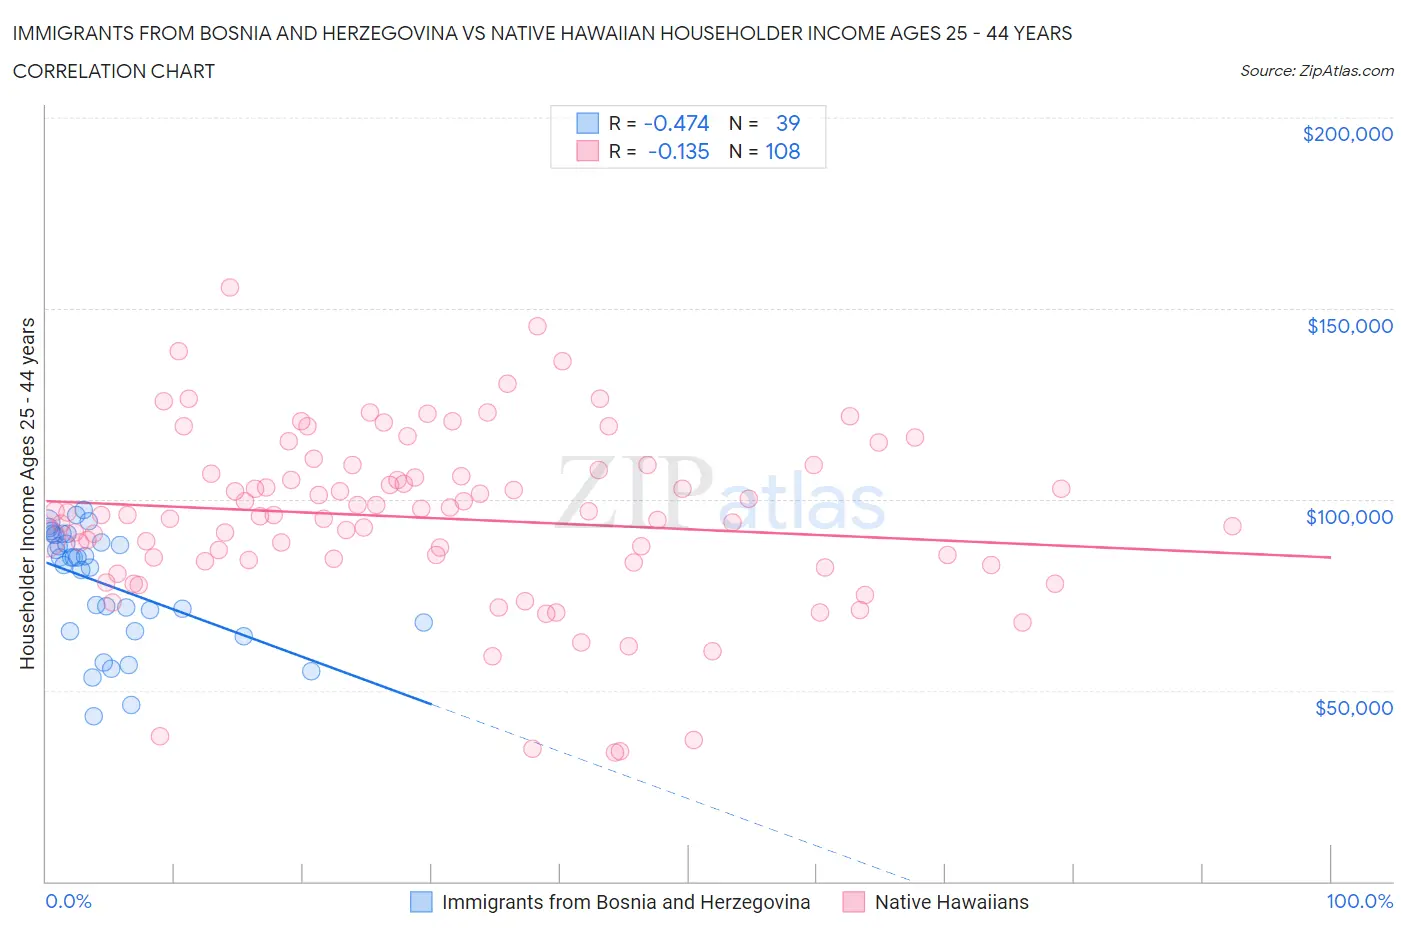 Immigrants from Bosnia and Herzegovina vs Native Hawaiian Householder Income Ages 25 - 44 years